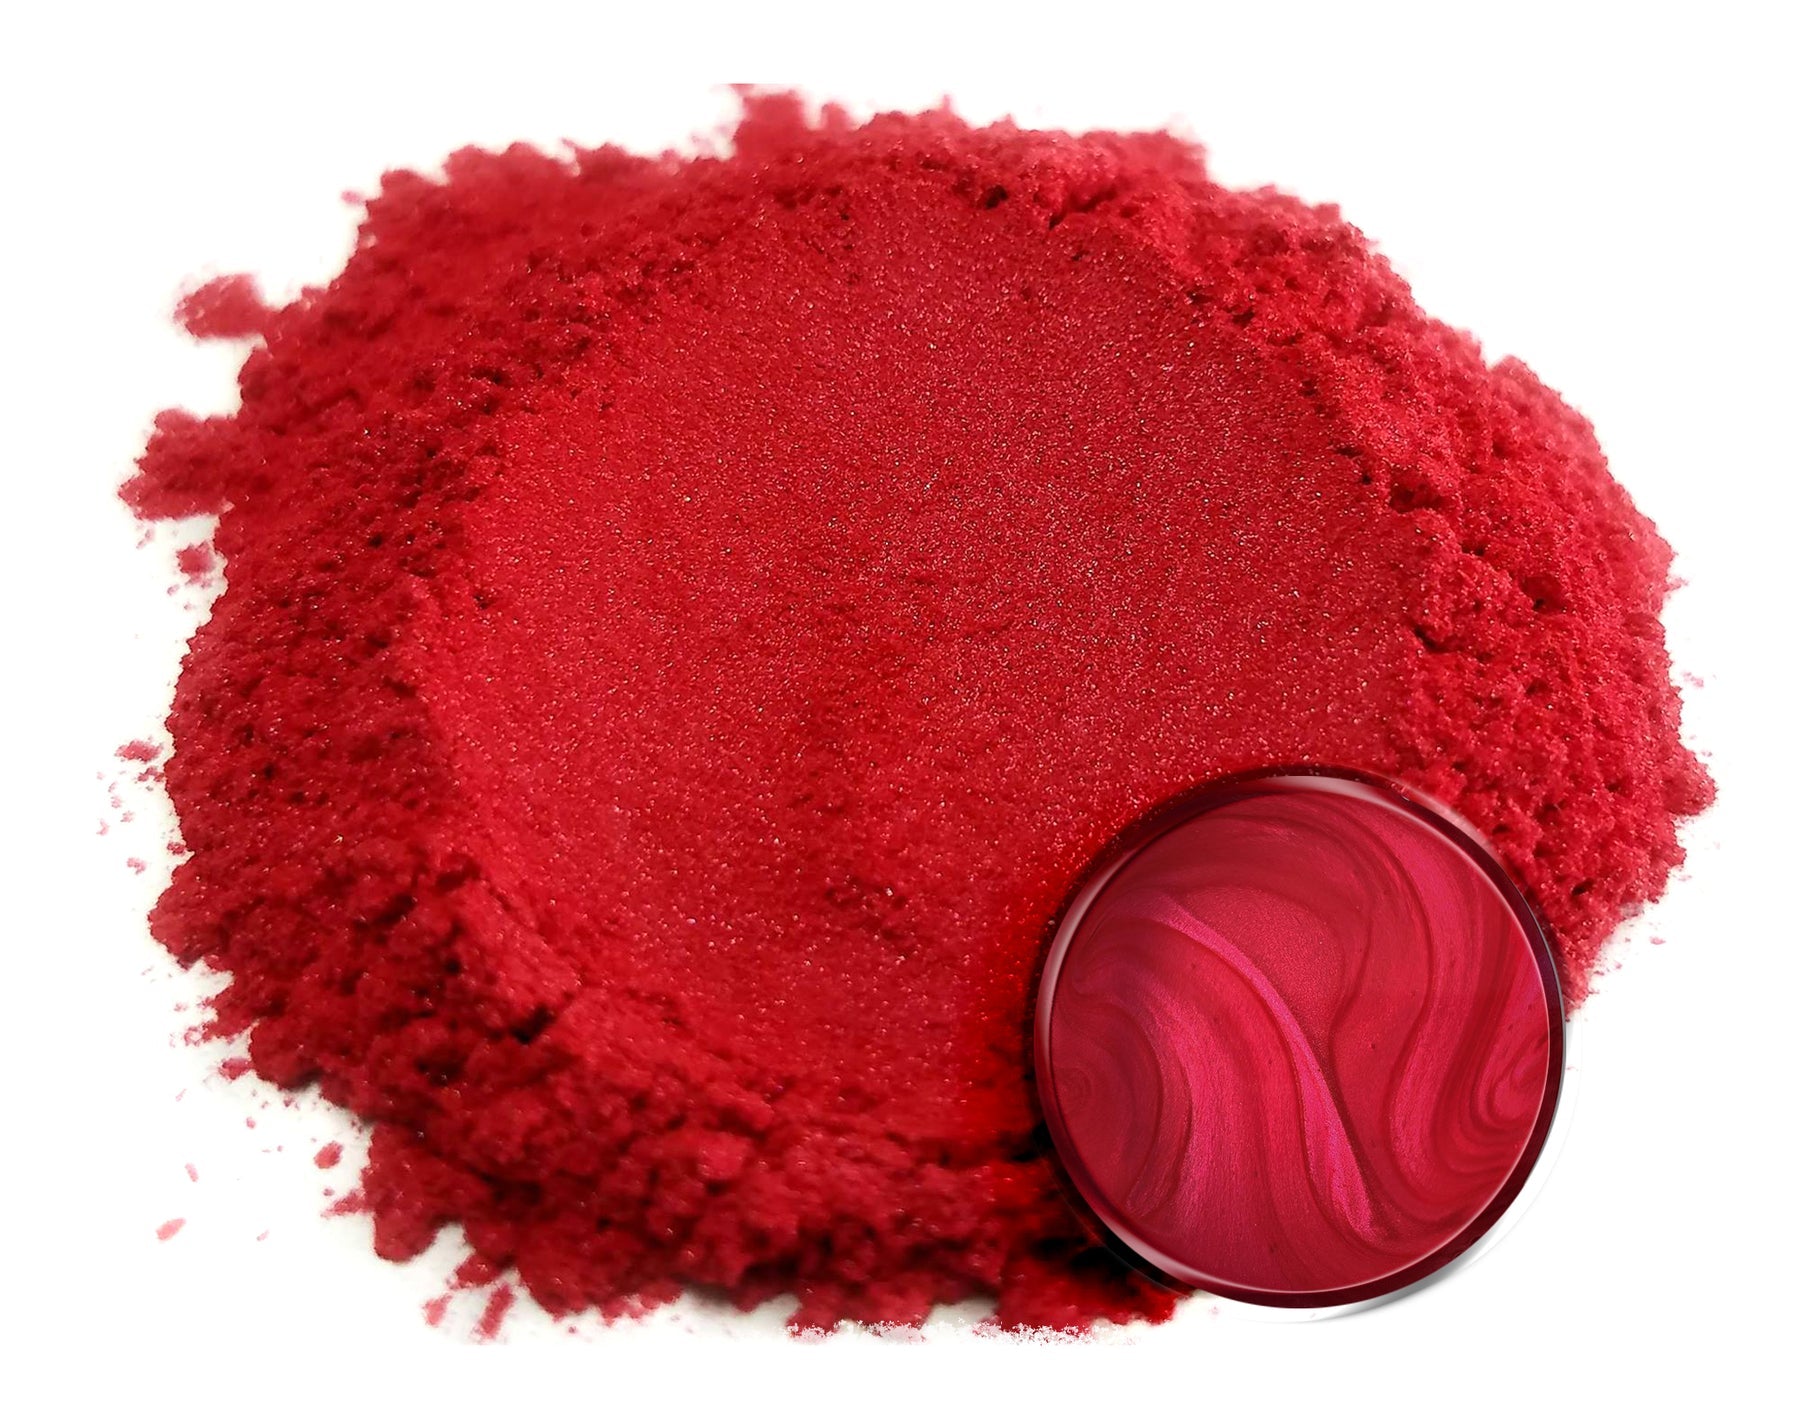 Powdered pigment by eye candy pigments for epoxy resin projects. In the color Baku Red.